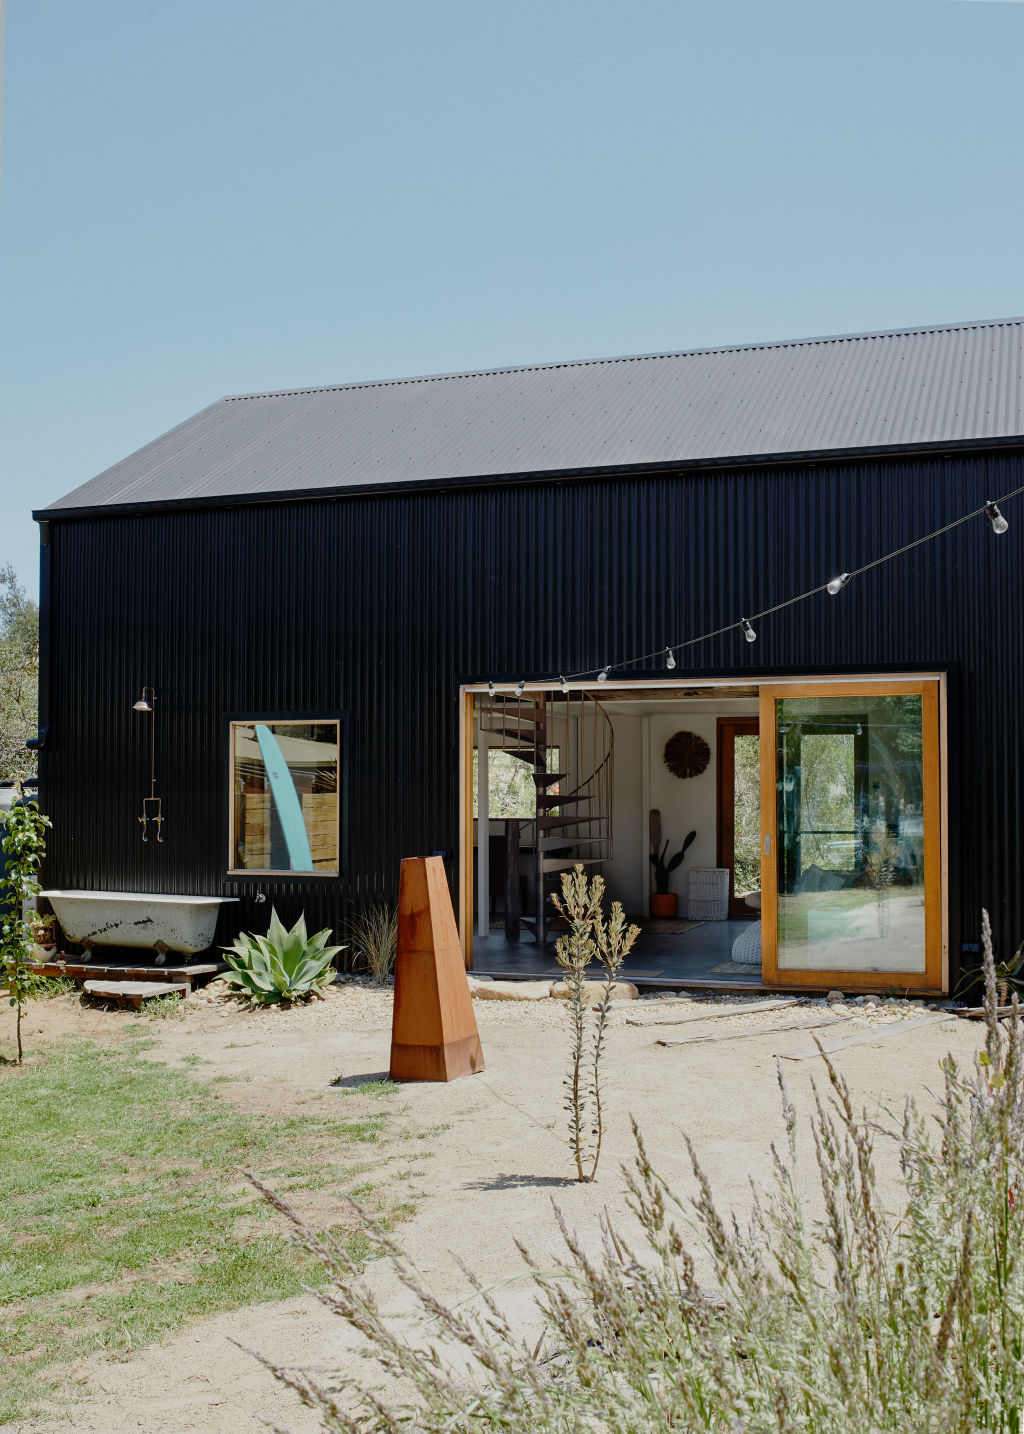 'I’ve always loved the idea of barns and sheds and thought it would be a fun and liberating place to live in,' Uhlich says. Photo: Amelia Stanwix